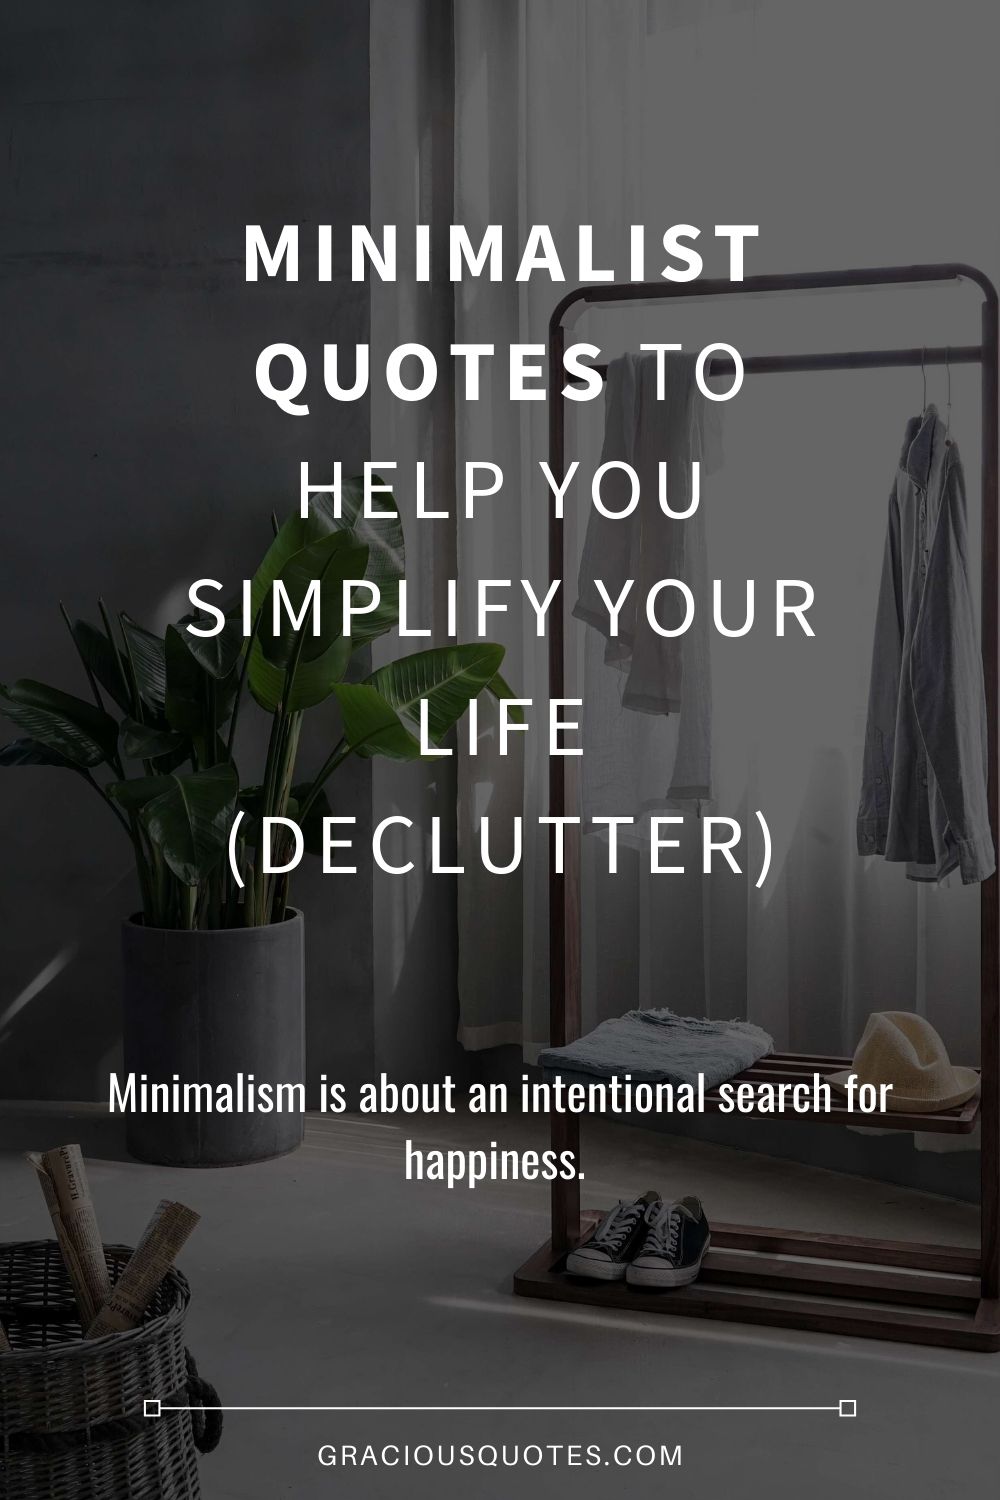 76 Minimalism Quotes to Simplify Your Life (DECLUTTER)